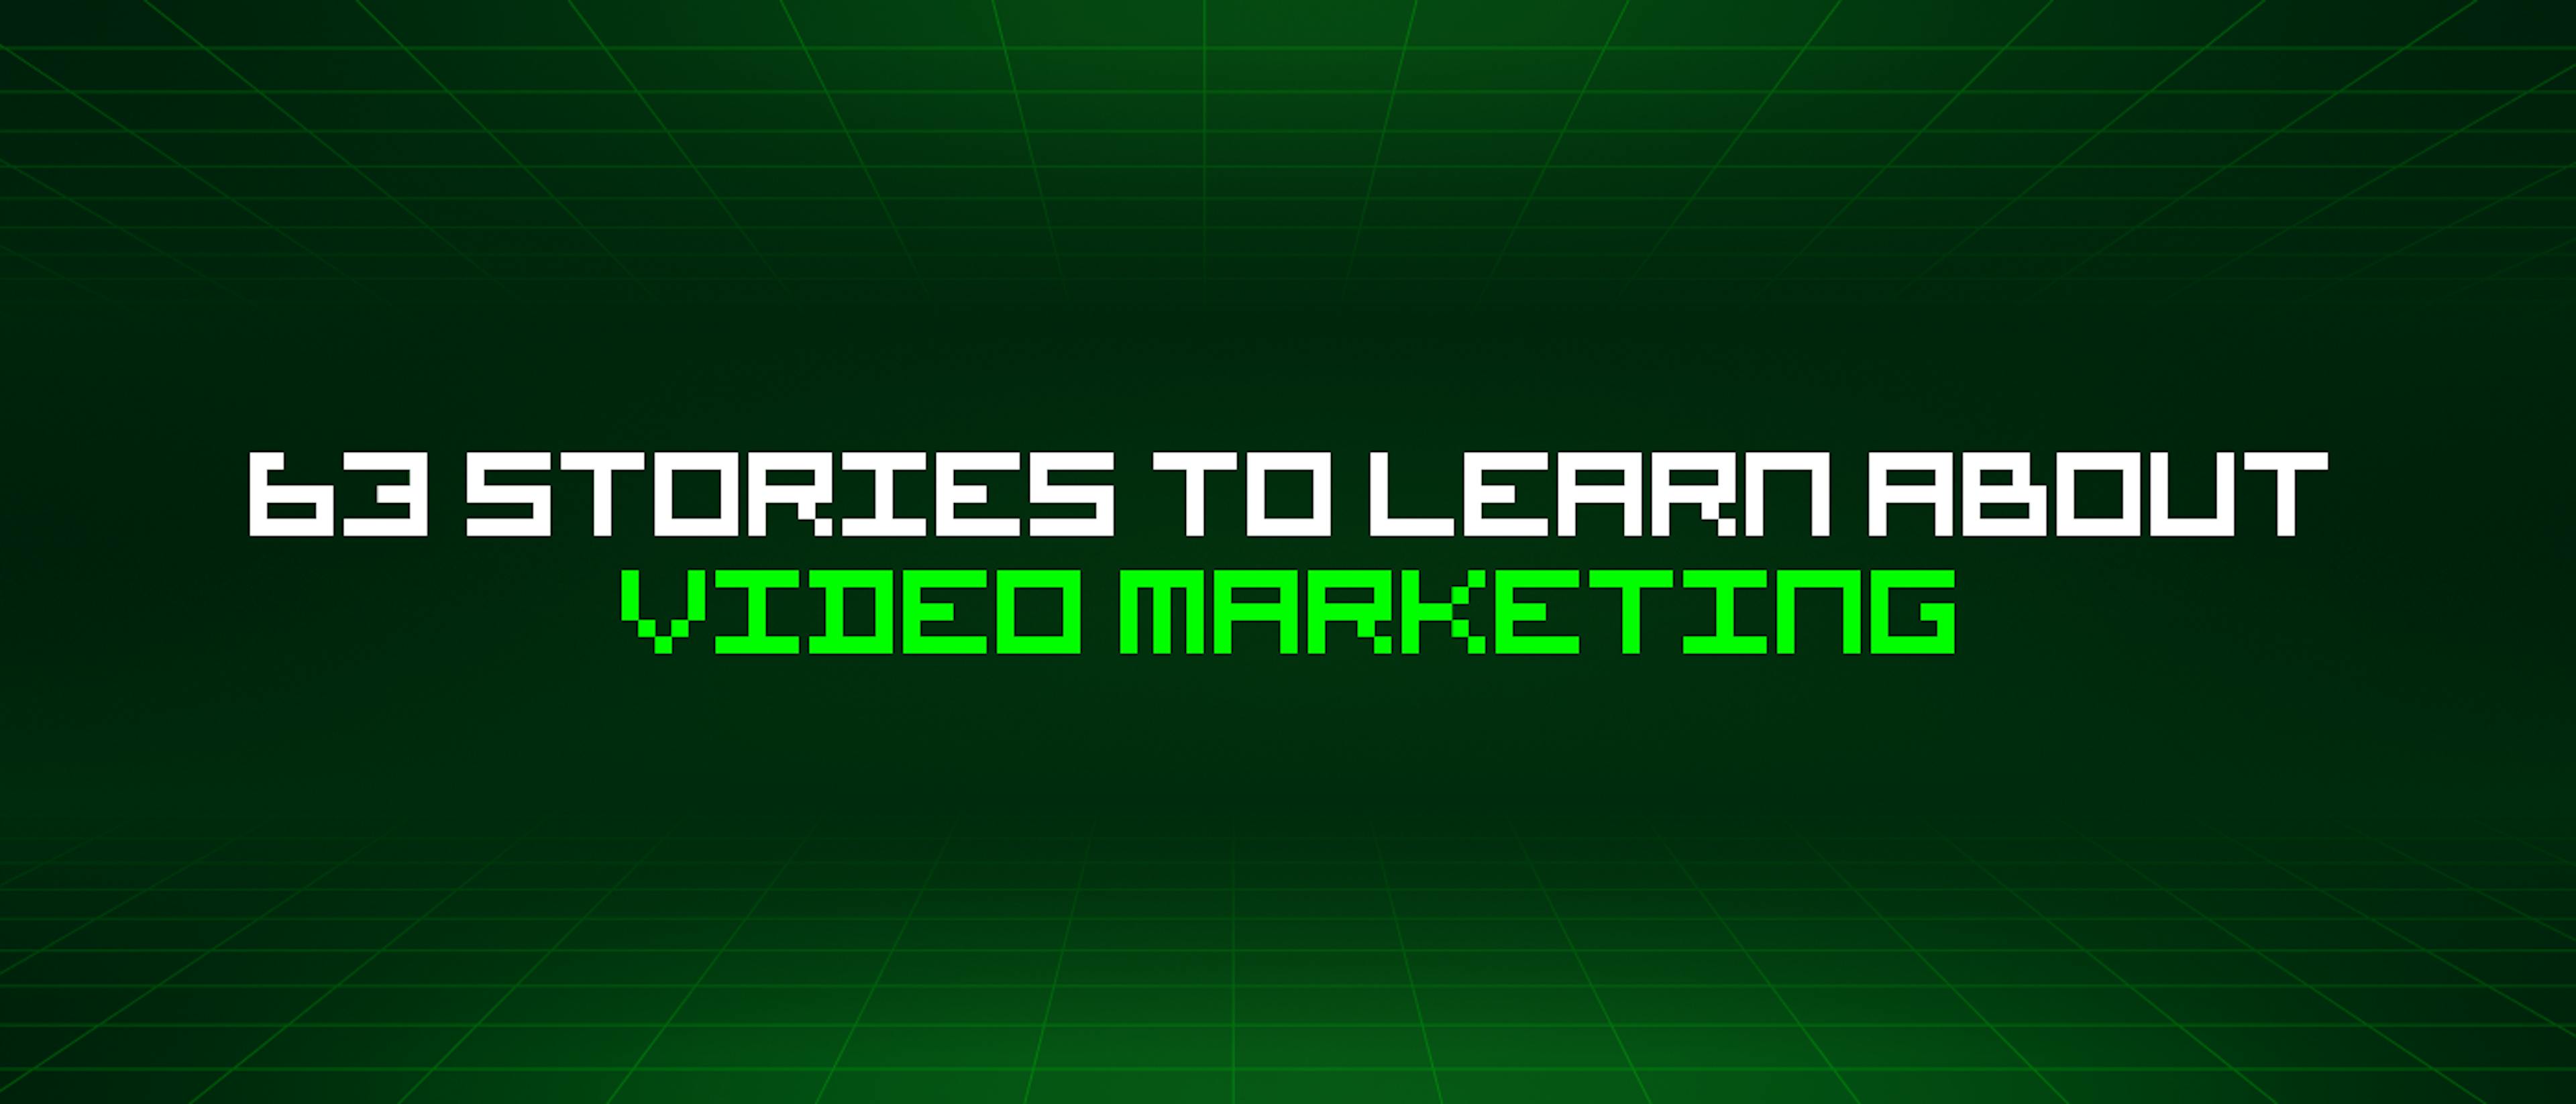 featured image - 63 Stories To Learn About Video Marketing